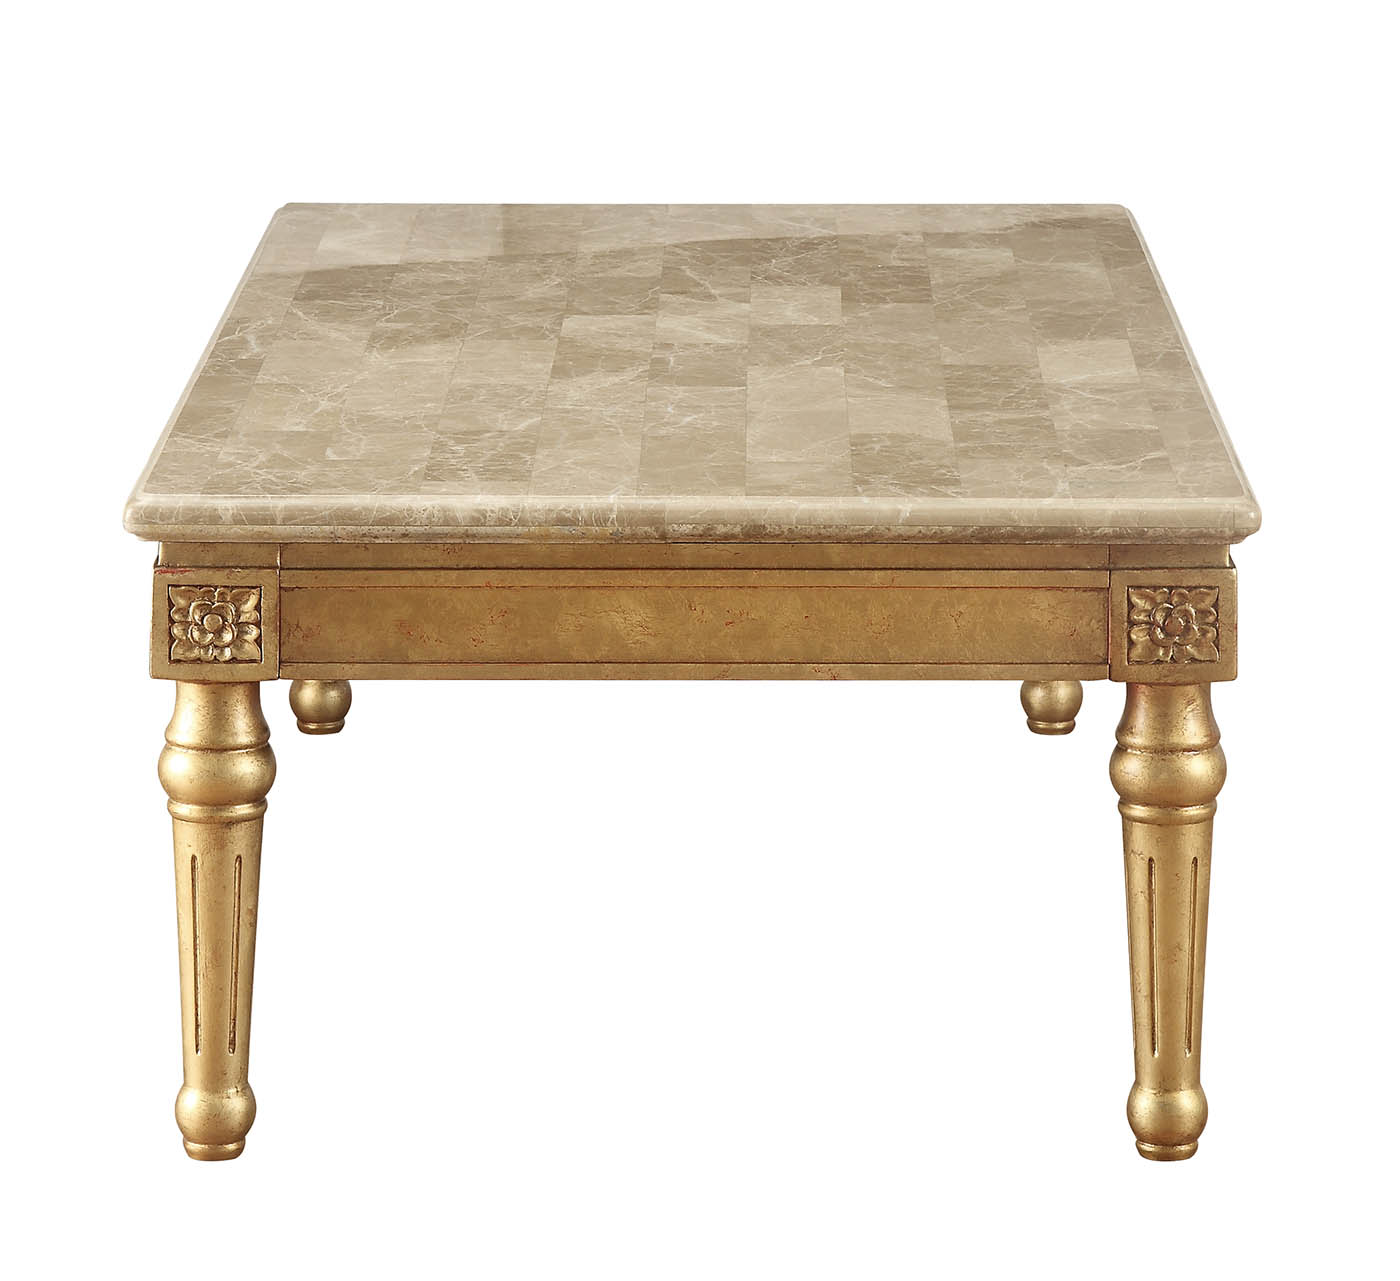 32" X 57" X 20" Marble Antique Gold Wood Coffee Table